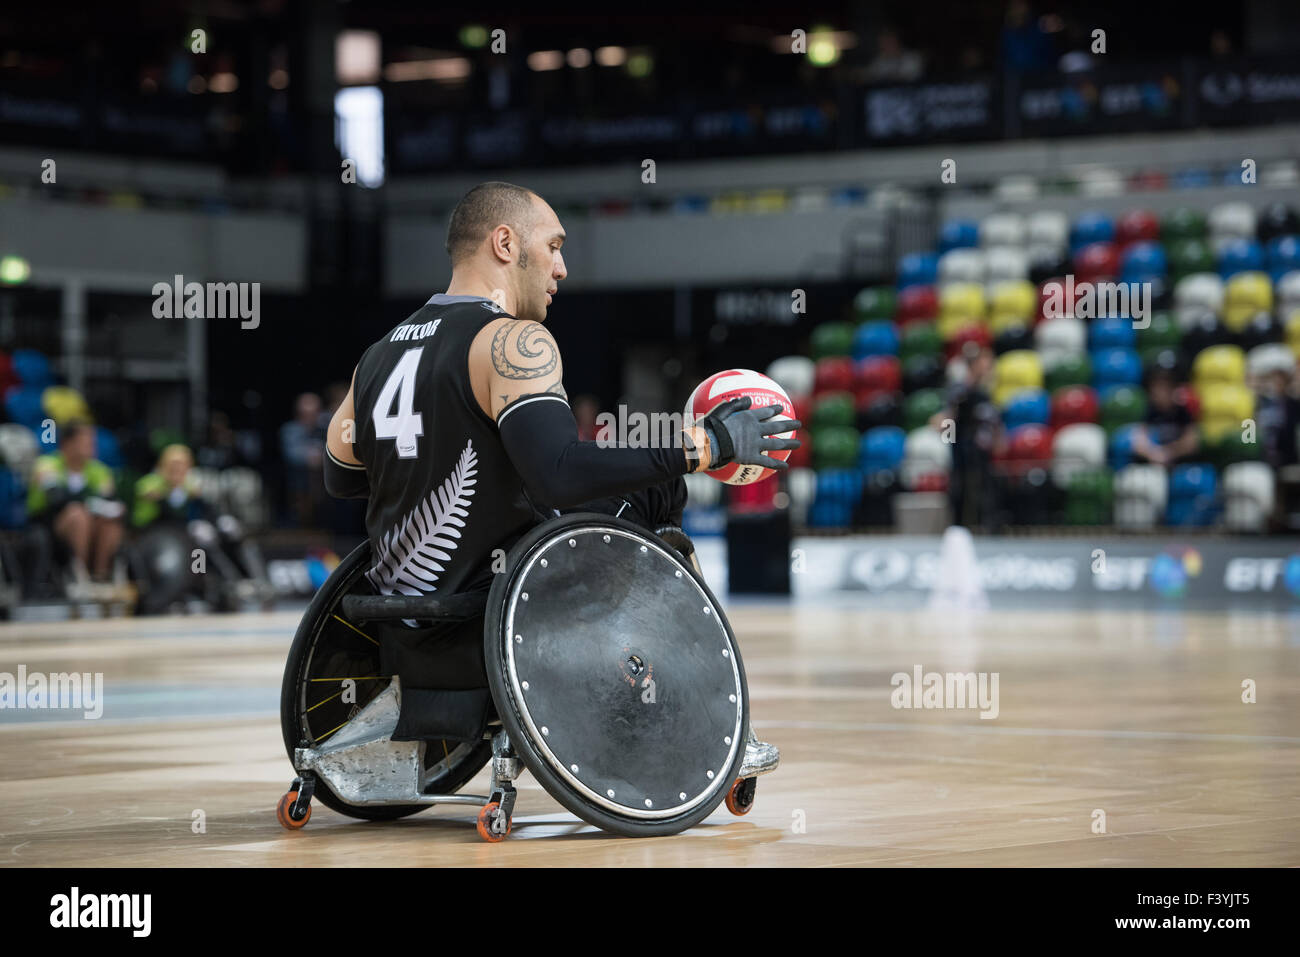 World Wheelchair Rugby Challenge 2015 RSA vs NZL. New Zealand 'Wheel Blacks' defeat South Africa 'Wheel Boks' 64-32. New Zealand no 4 Sholto Taylor with the ball. 13th October, 2015. copyright PMGimaging/Alamy Live News Stock Photo